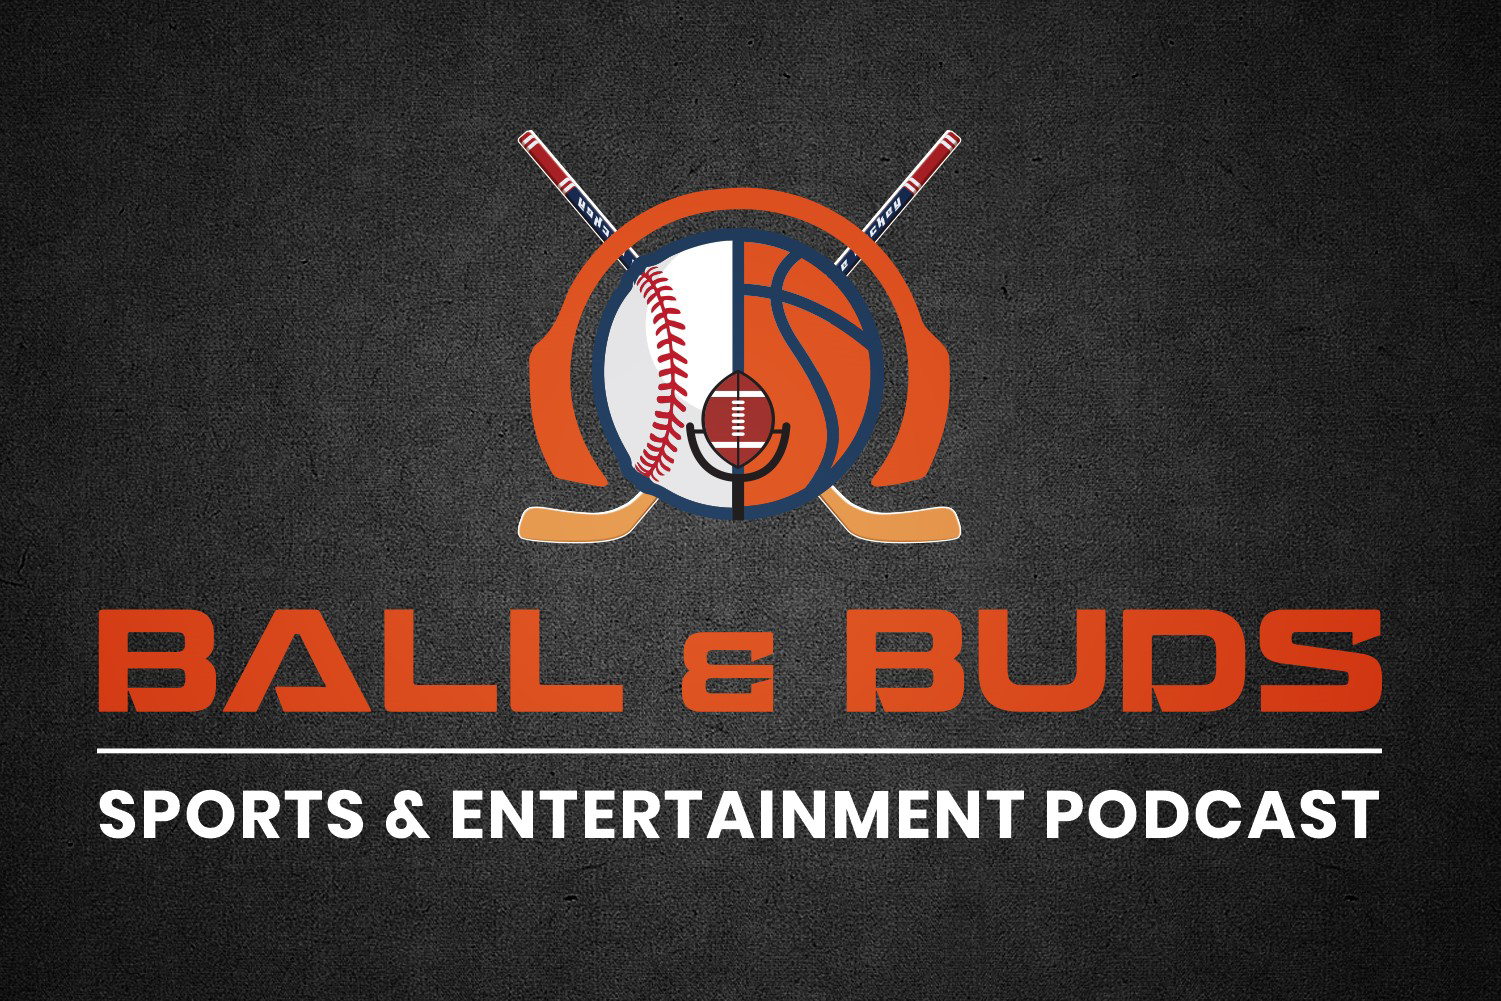 A highlight from 'Tyson Fury vs Deontay Wilder & MLB Season Review' ft. Combat Sports Insider Clubber D the Combat G & MLB Insider Mike Wheby (Ball & Buds Podcast #28)